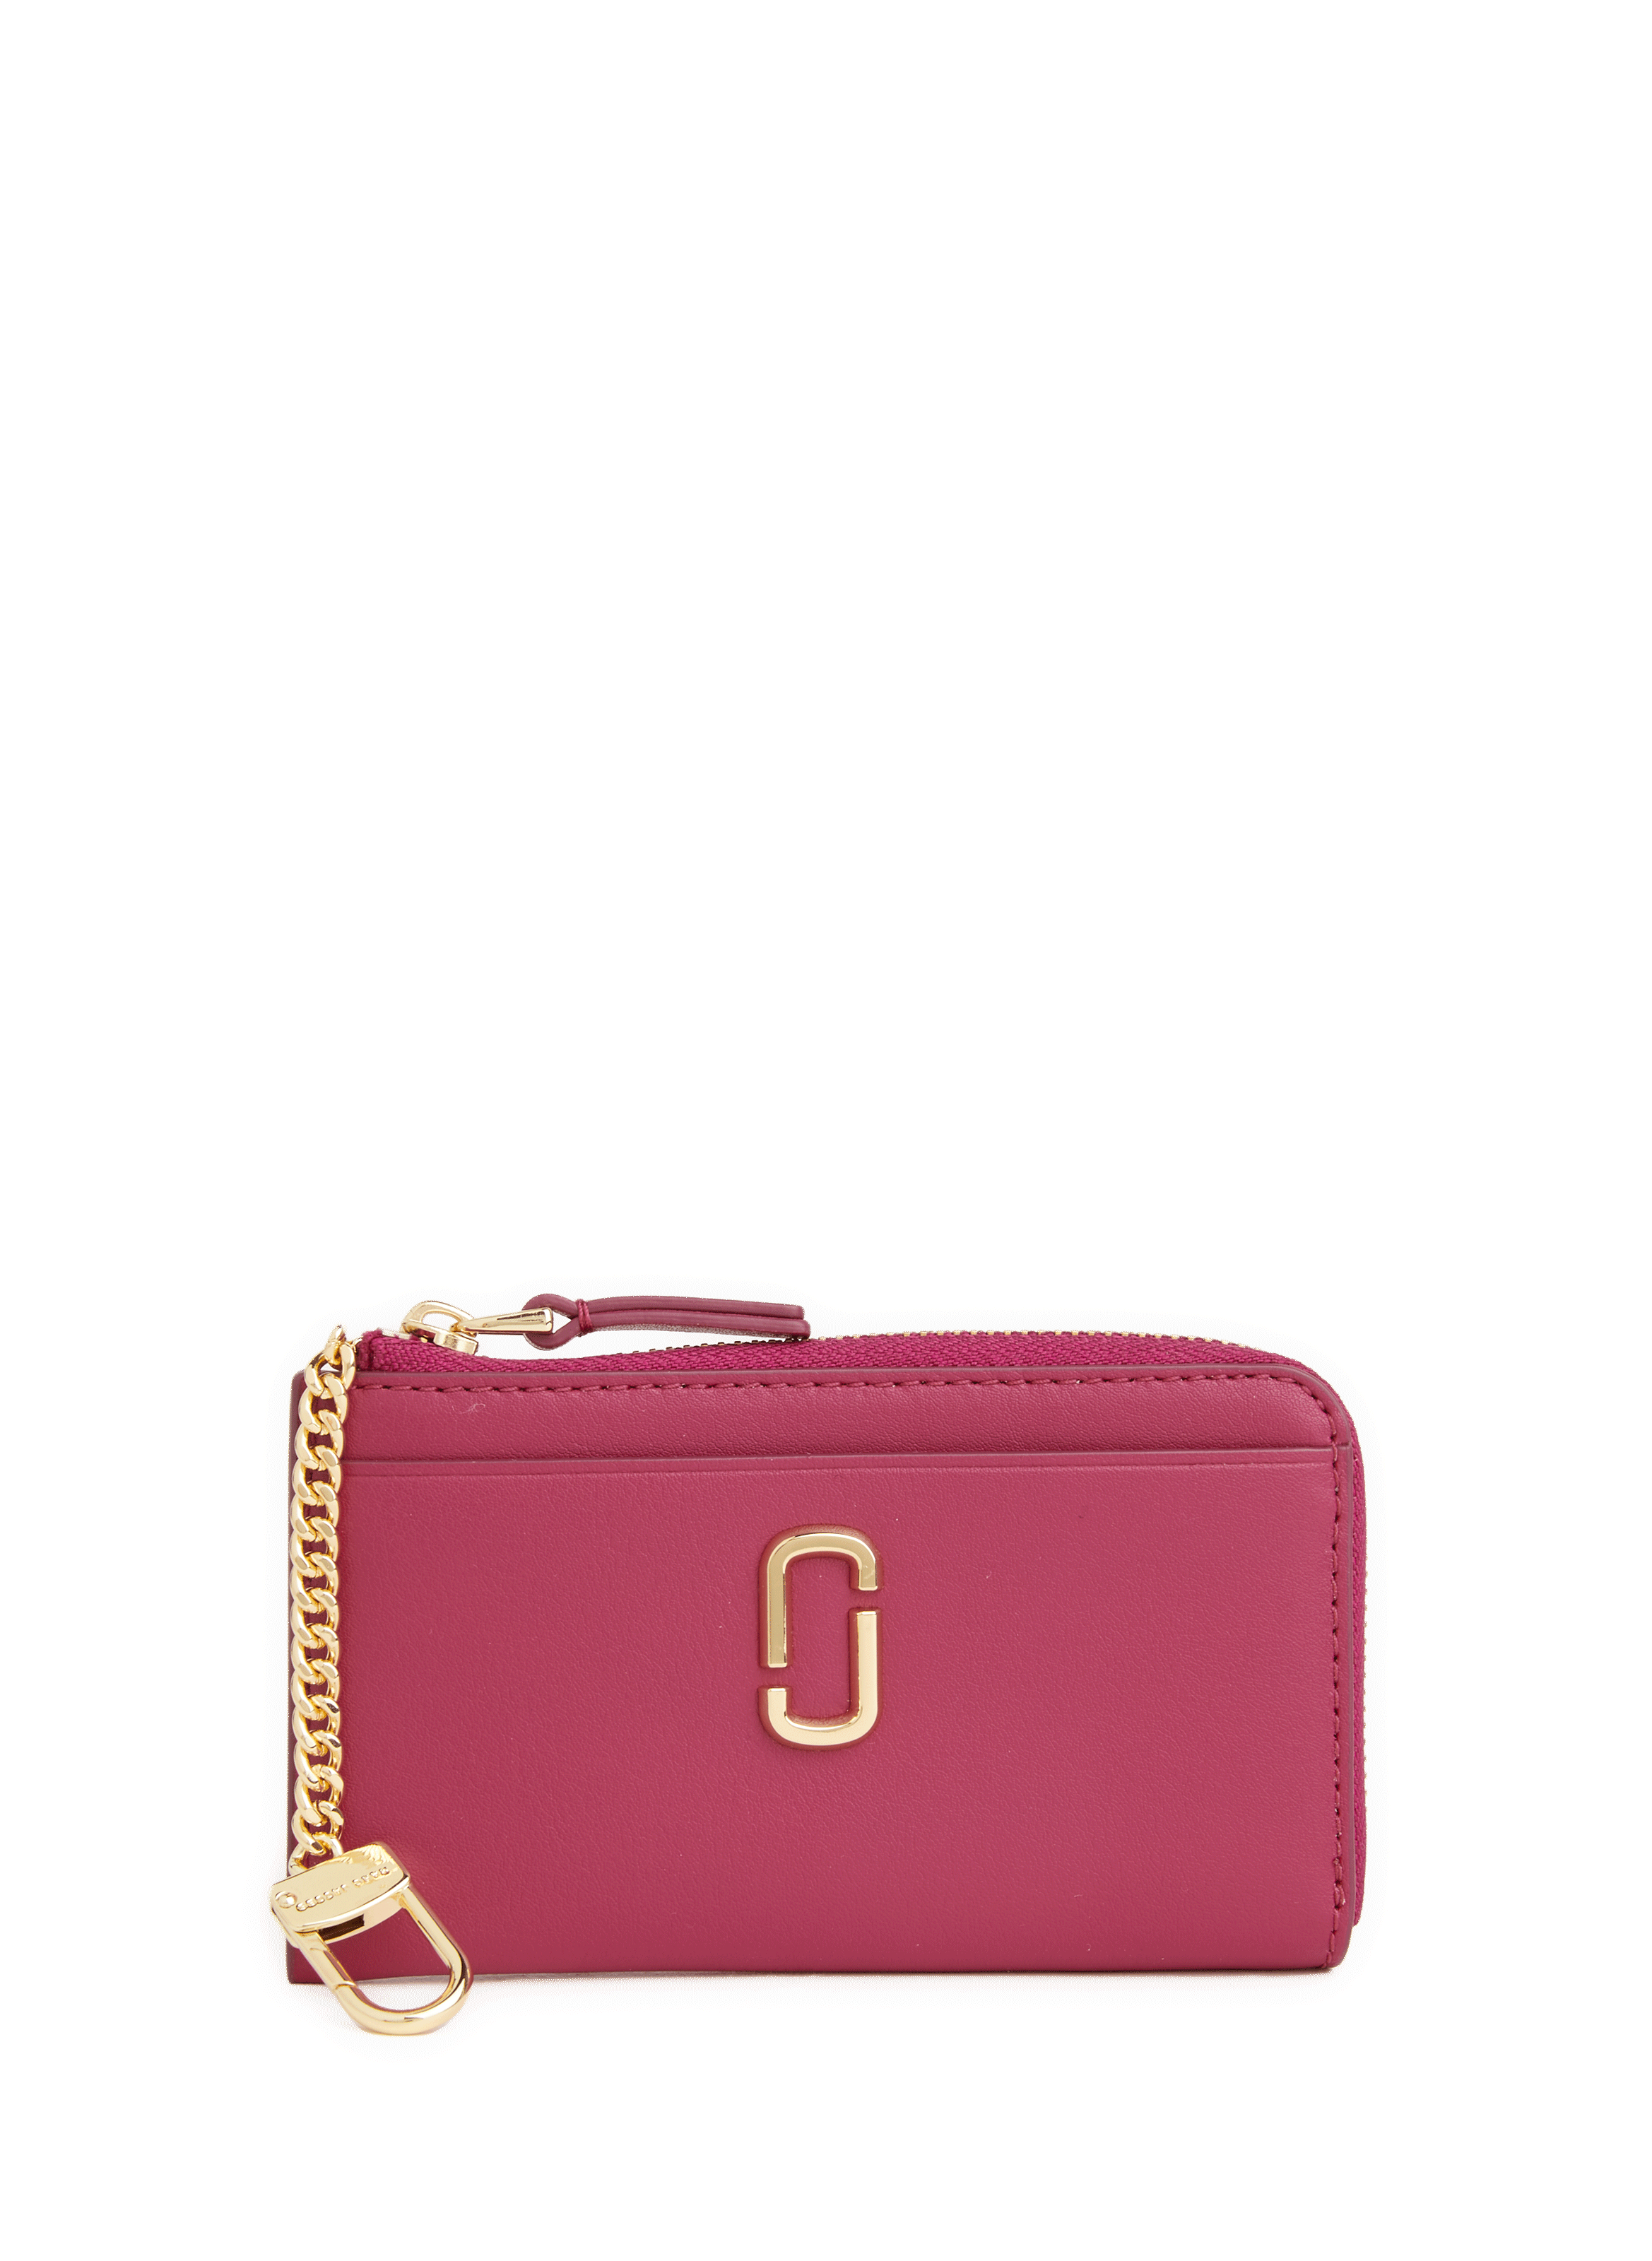 MARC JACOBS: Handbag woman - Baby Pink | Marc Jacobs mini bag H053L01RE22  online at GIGLIO.COM